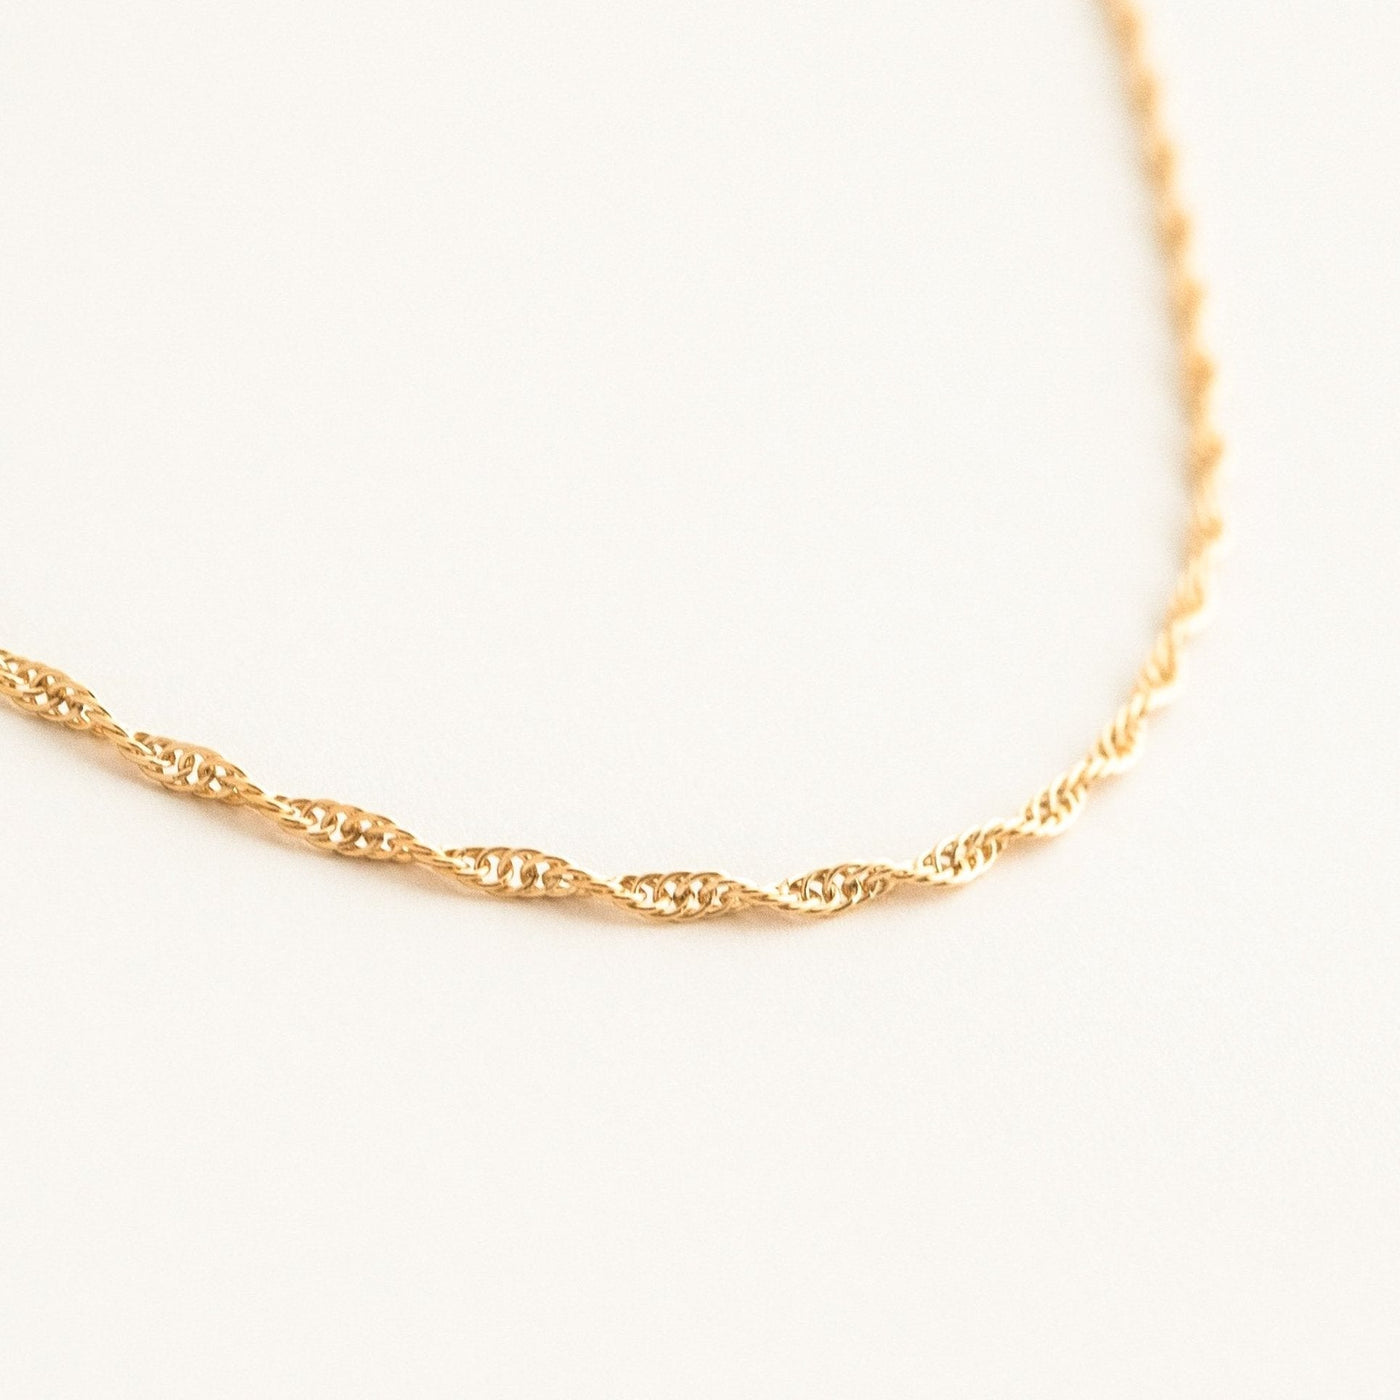 Dainty Rope Necklace by Simple & Dainty Jewelry